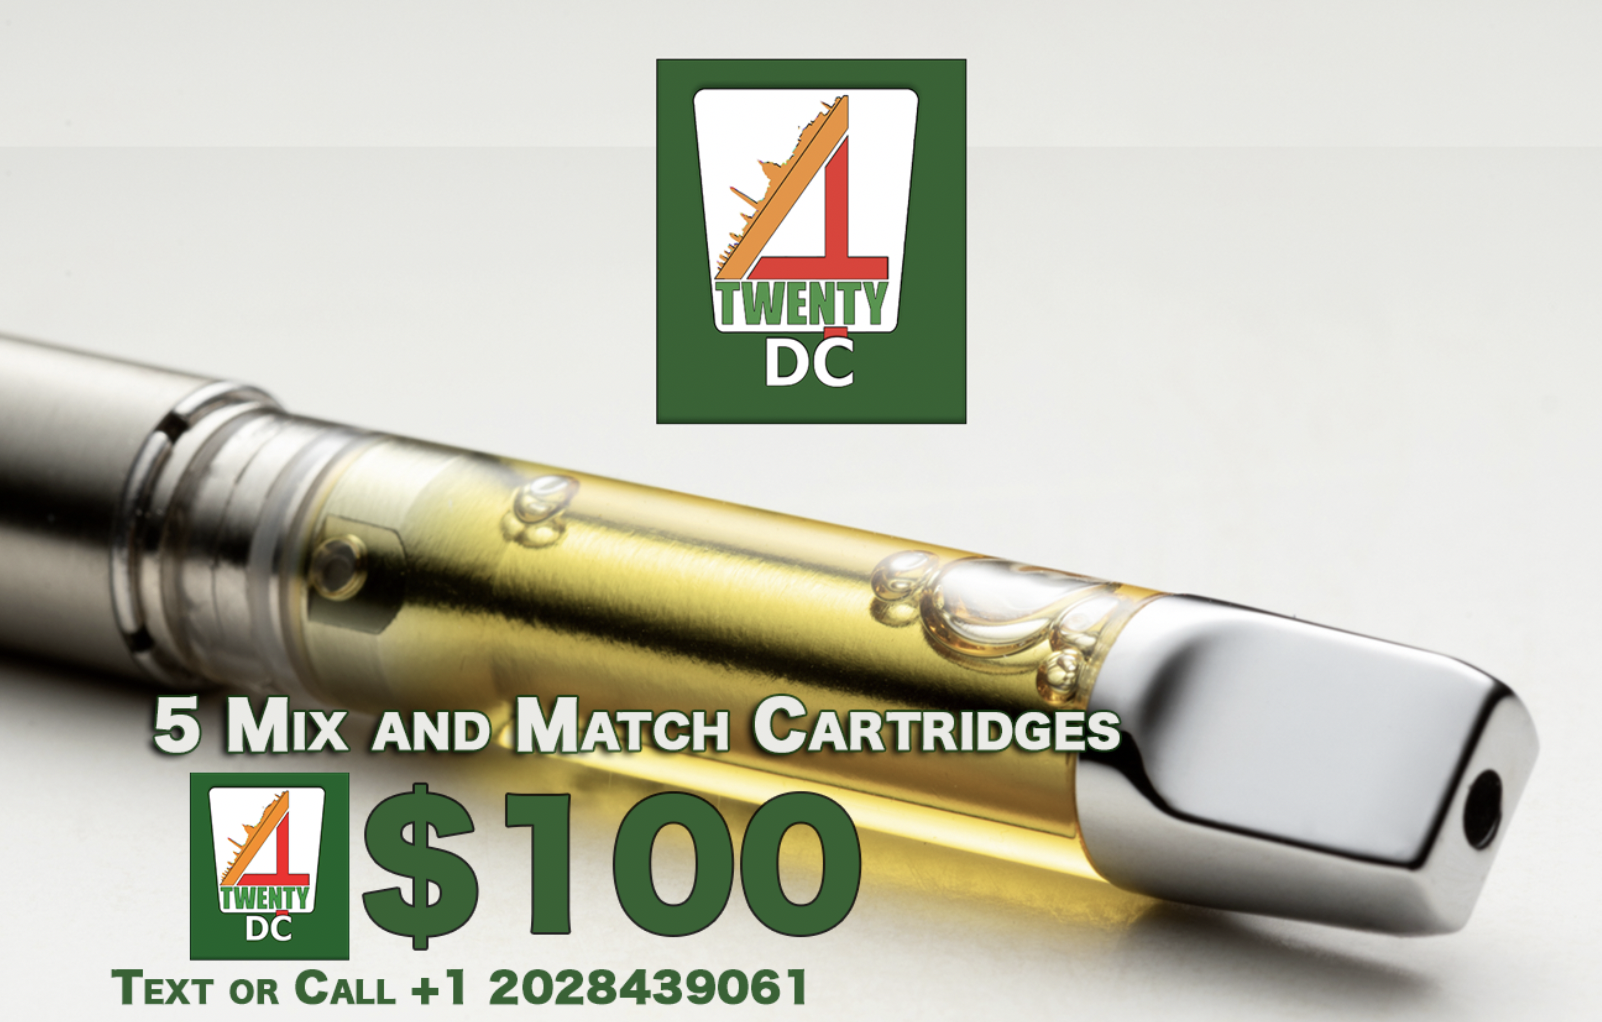 $100 5 Mix and Match Cartridges for $100